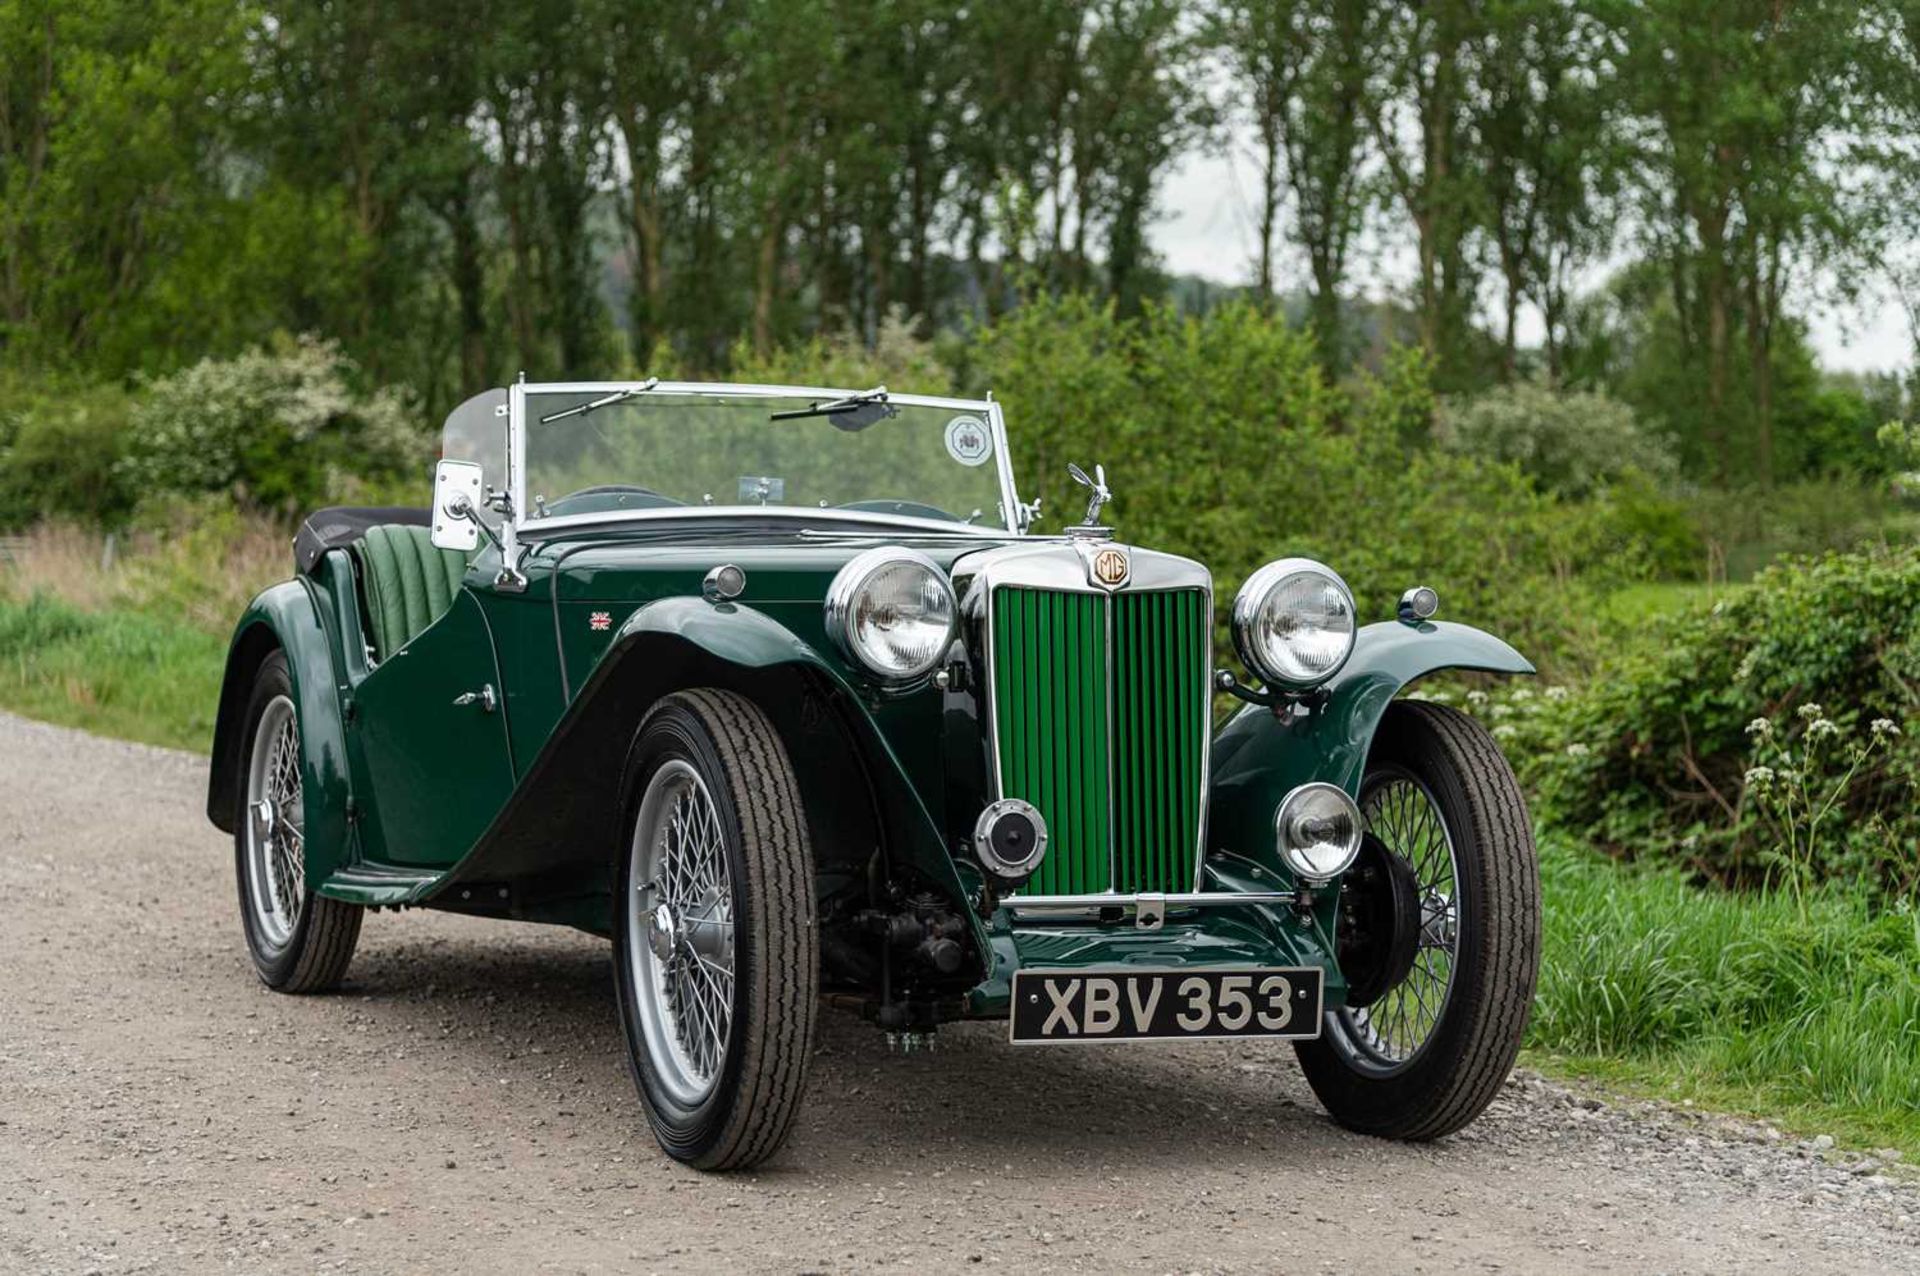 1947 MG TC Midget  Fully restored, right-hand-drive UK home market example - Image 6 of 76